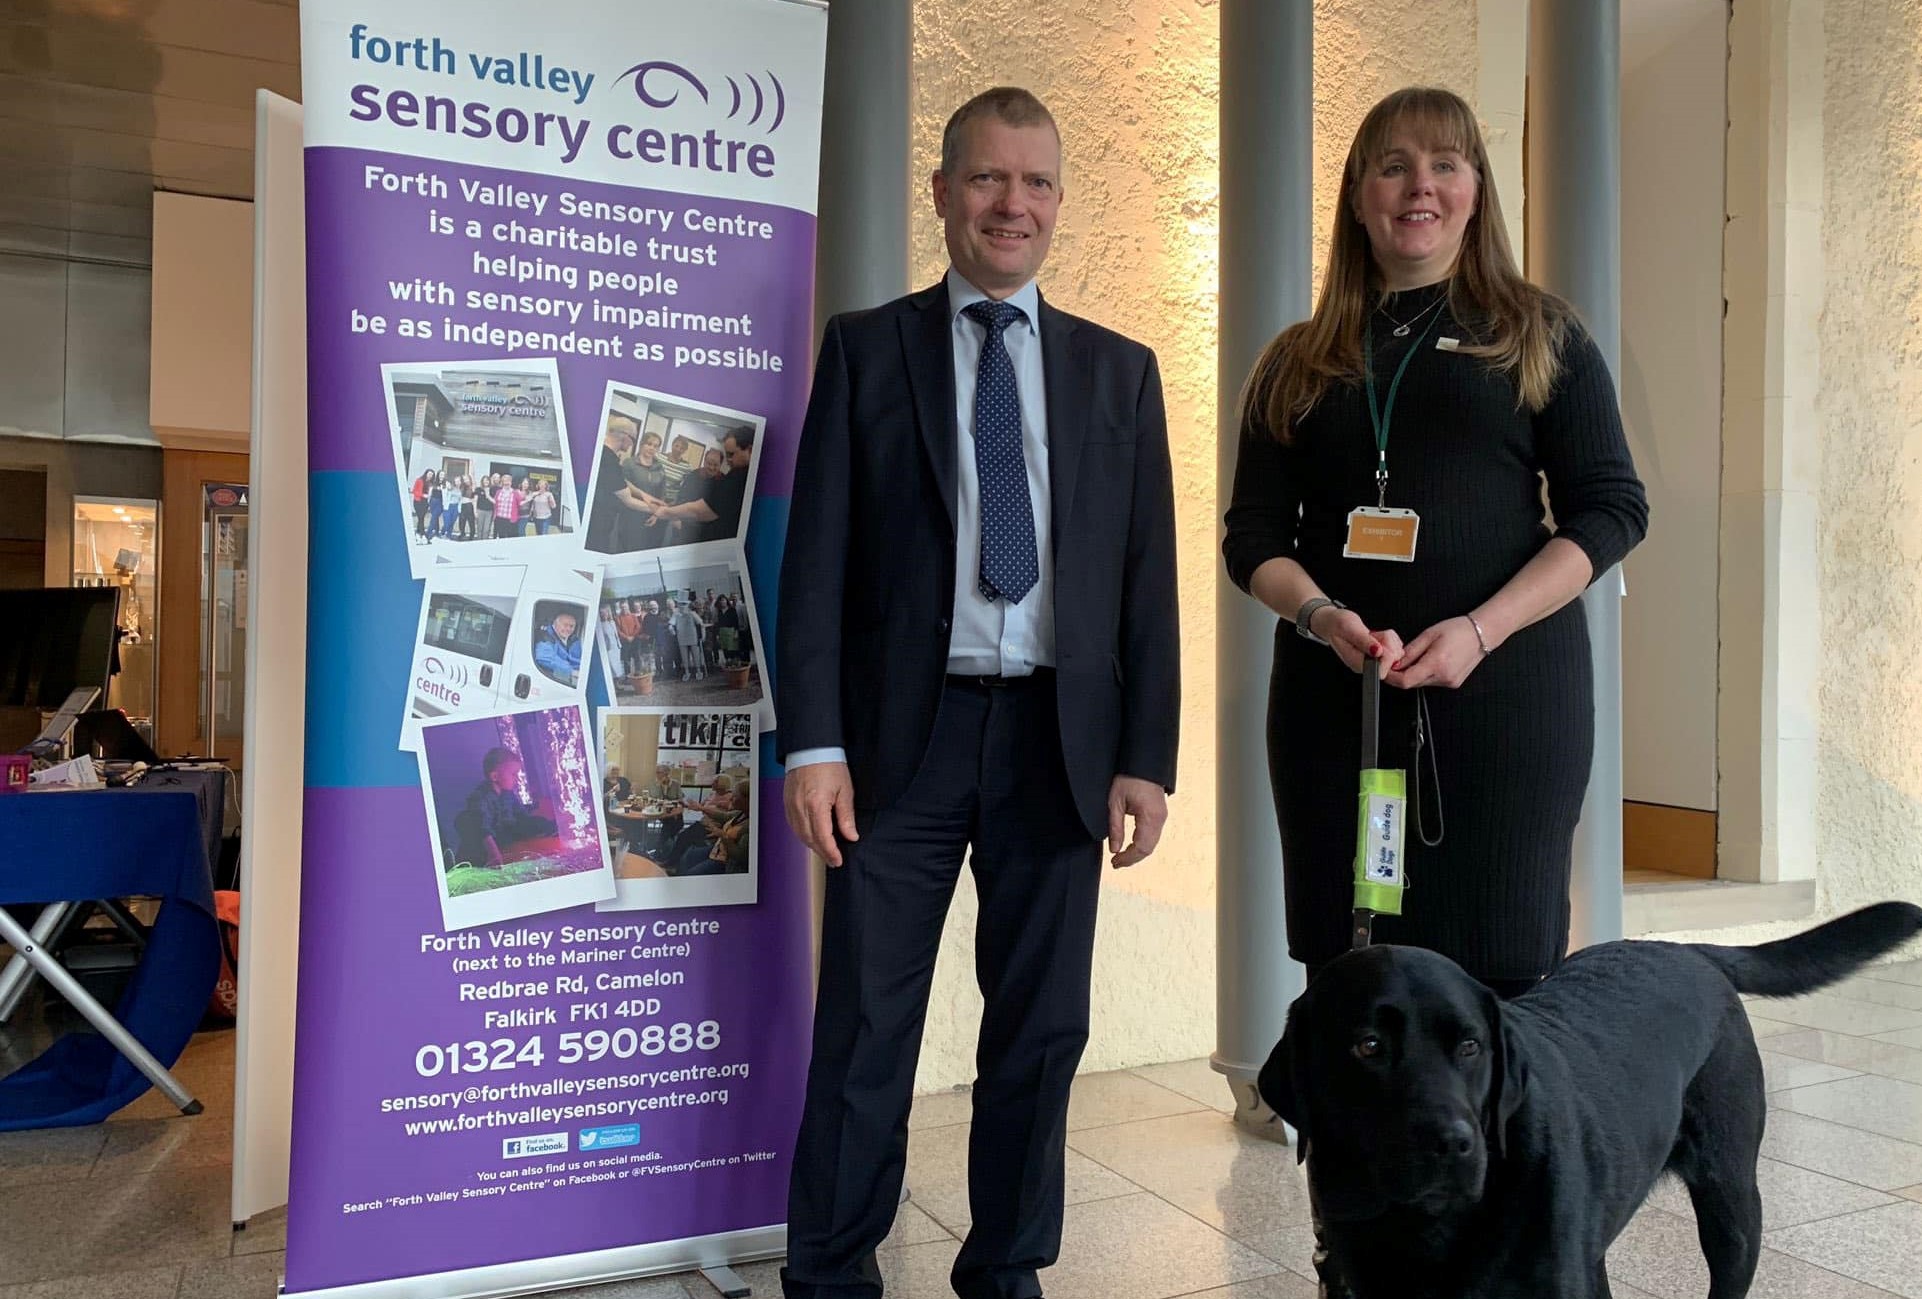 Laura Cluxton with guide dog Sadie and Graham Simpson MSP standing by Forth Valley Sensory Centre exhibition stand.